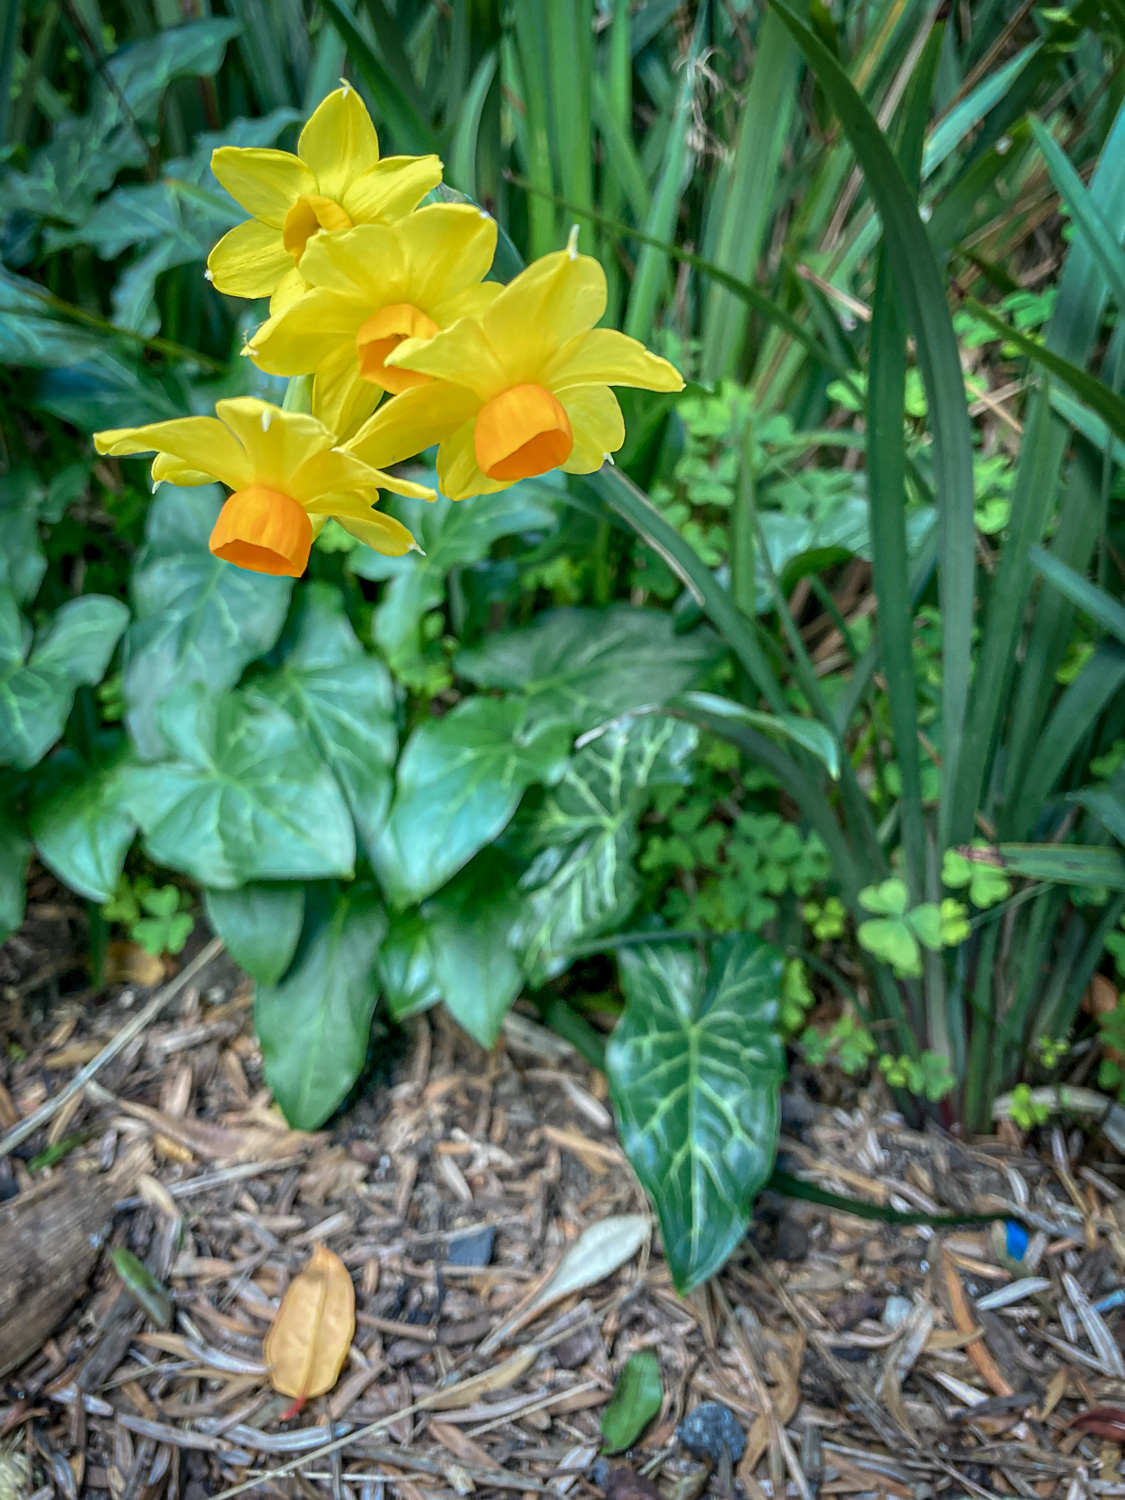 Small yellow daffodils growing in a leafy green undergrowth